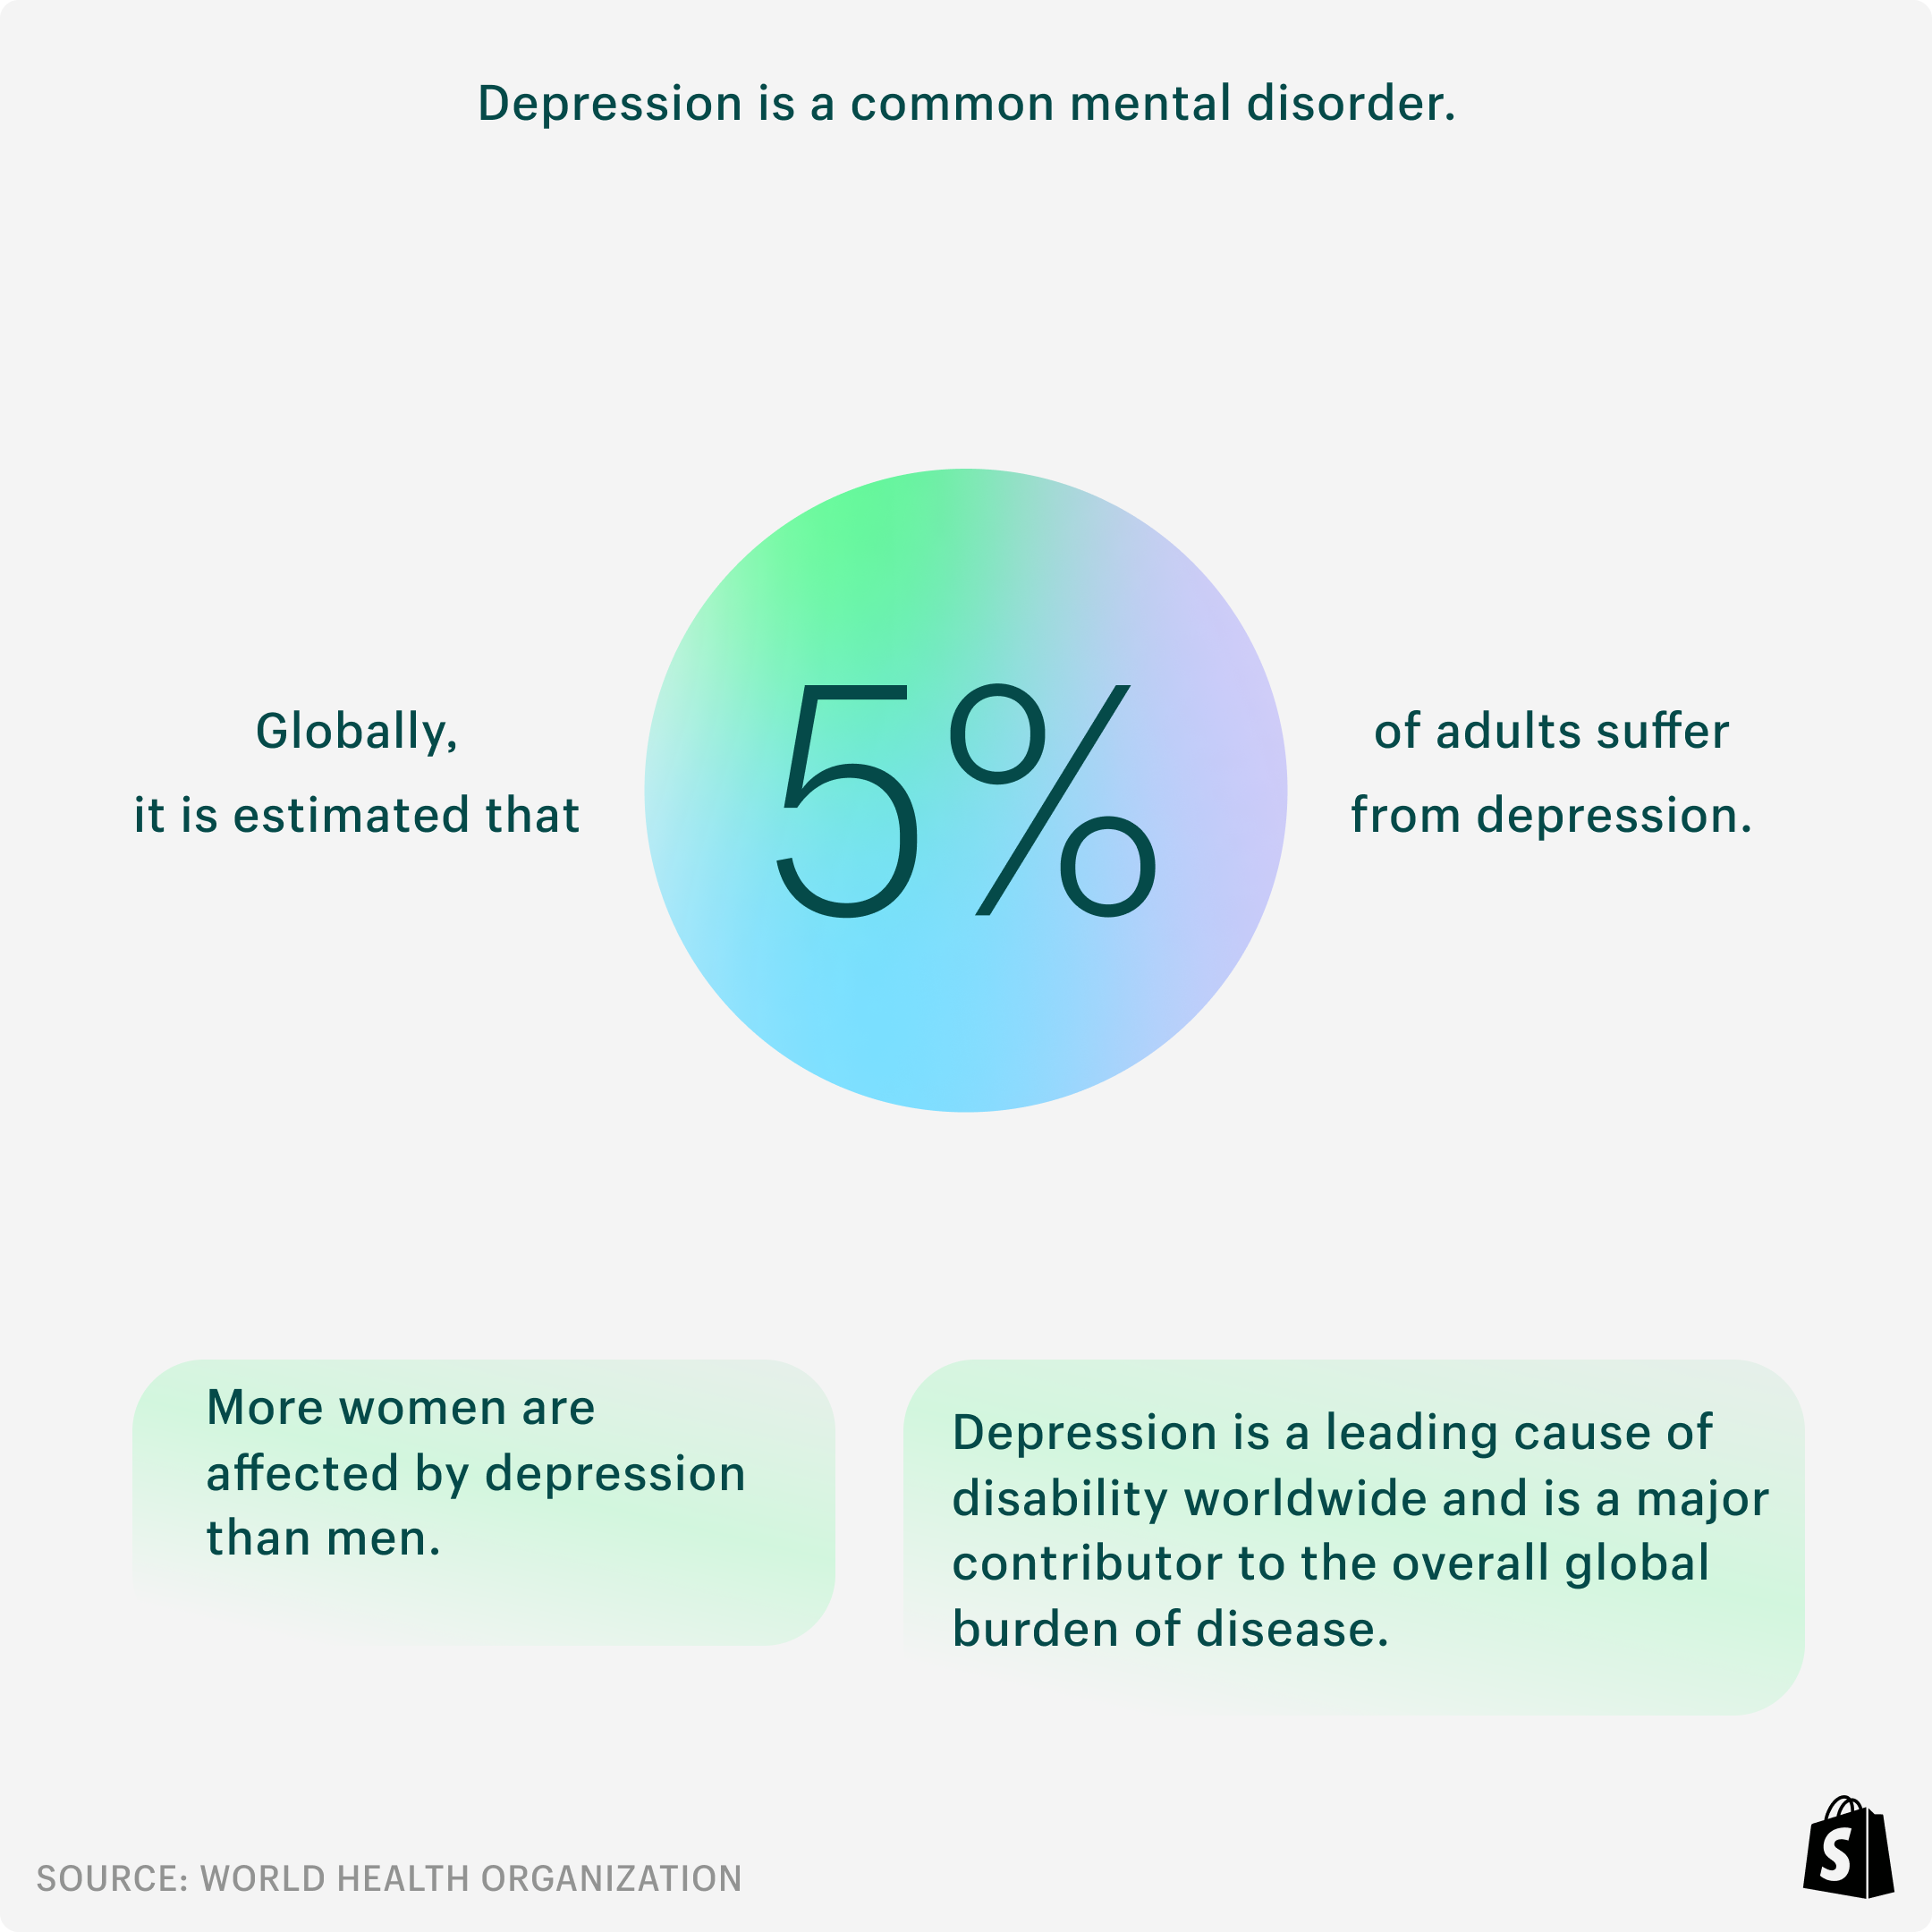 Data visualization depicting stats: 5% of adults suffer from depression with women experiencing it more than men